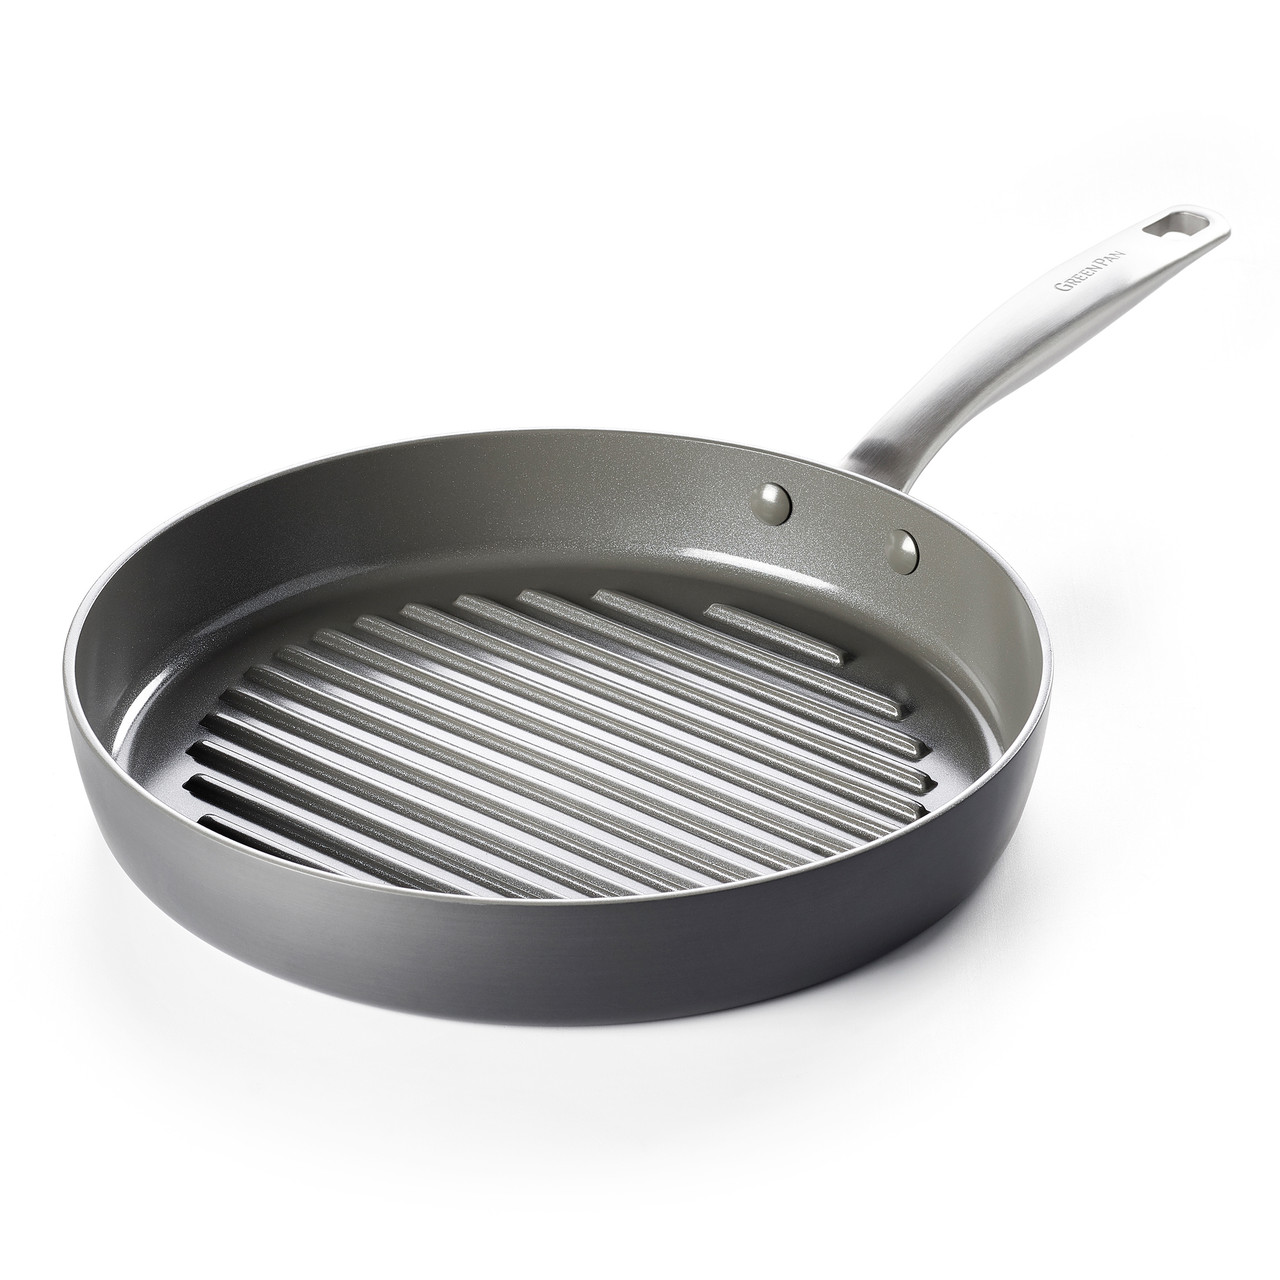 Select by Calphalon Hard-Anodized Nonstick Round Grill Pan - Black